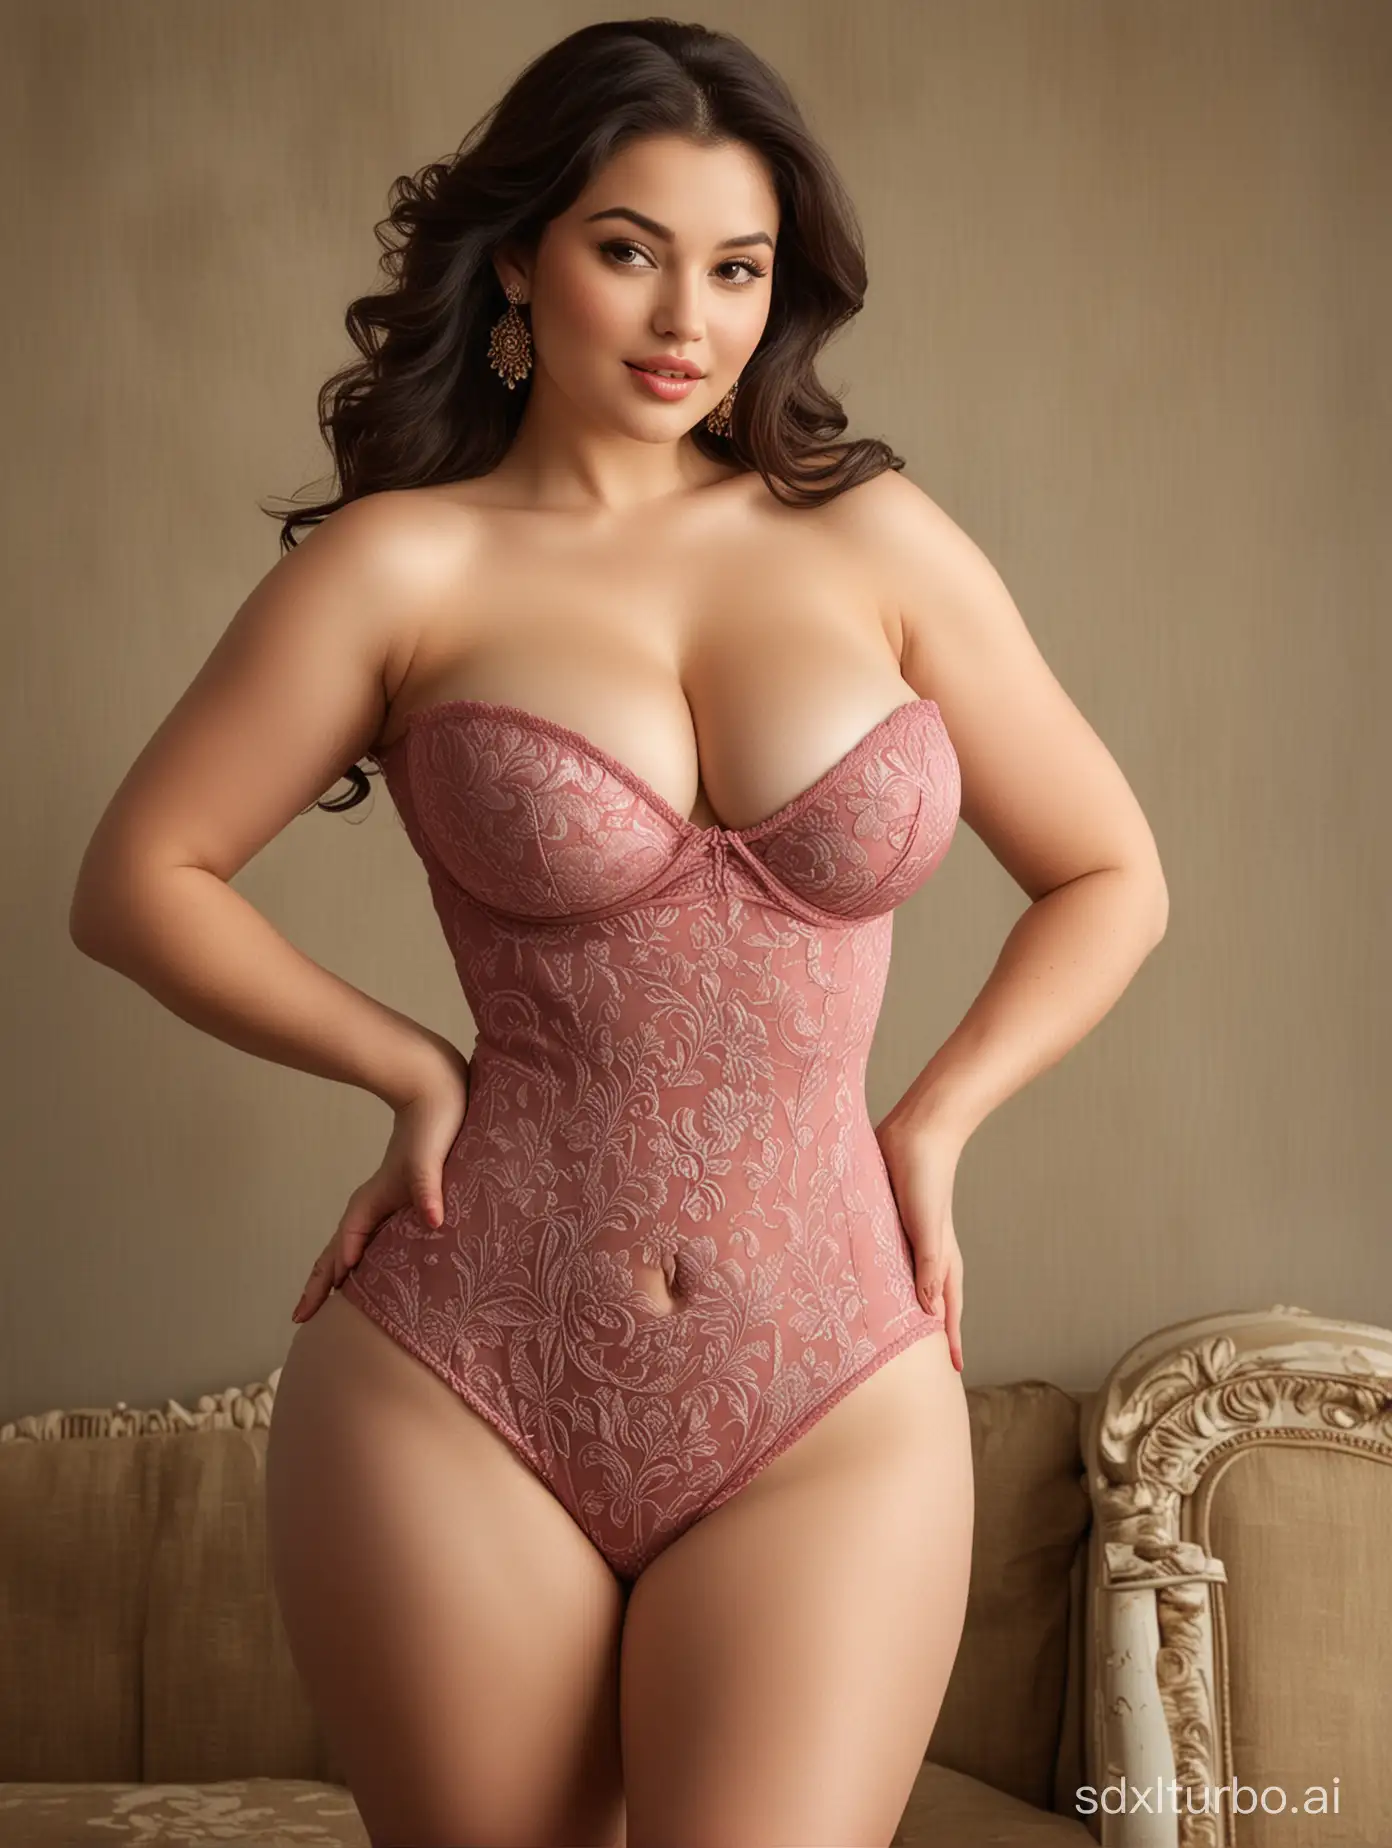 In a scene of undeniable allure, a ((curvaceous)) woman exudes ((confidence)) and ((charm)) with every sway of her hips. Her ((voluptuous figure)) is a celebration of ((femininity)), accentuated by her choice of ((alluring)) attire. With each movement, she radiates ((sensuality)), captivating all who behold her ((mesmerizing)) presence.